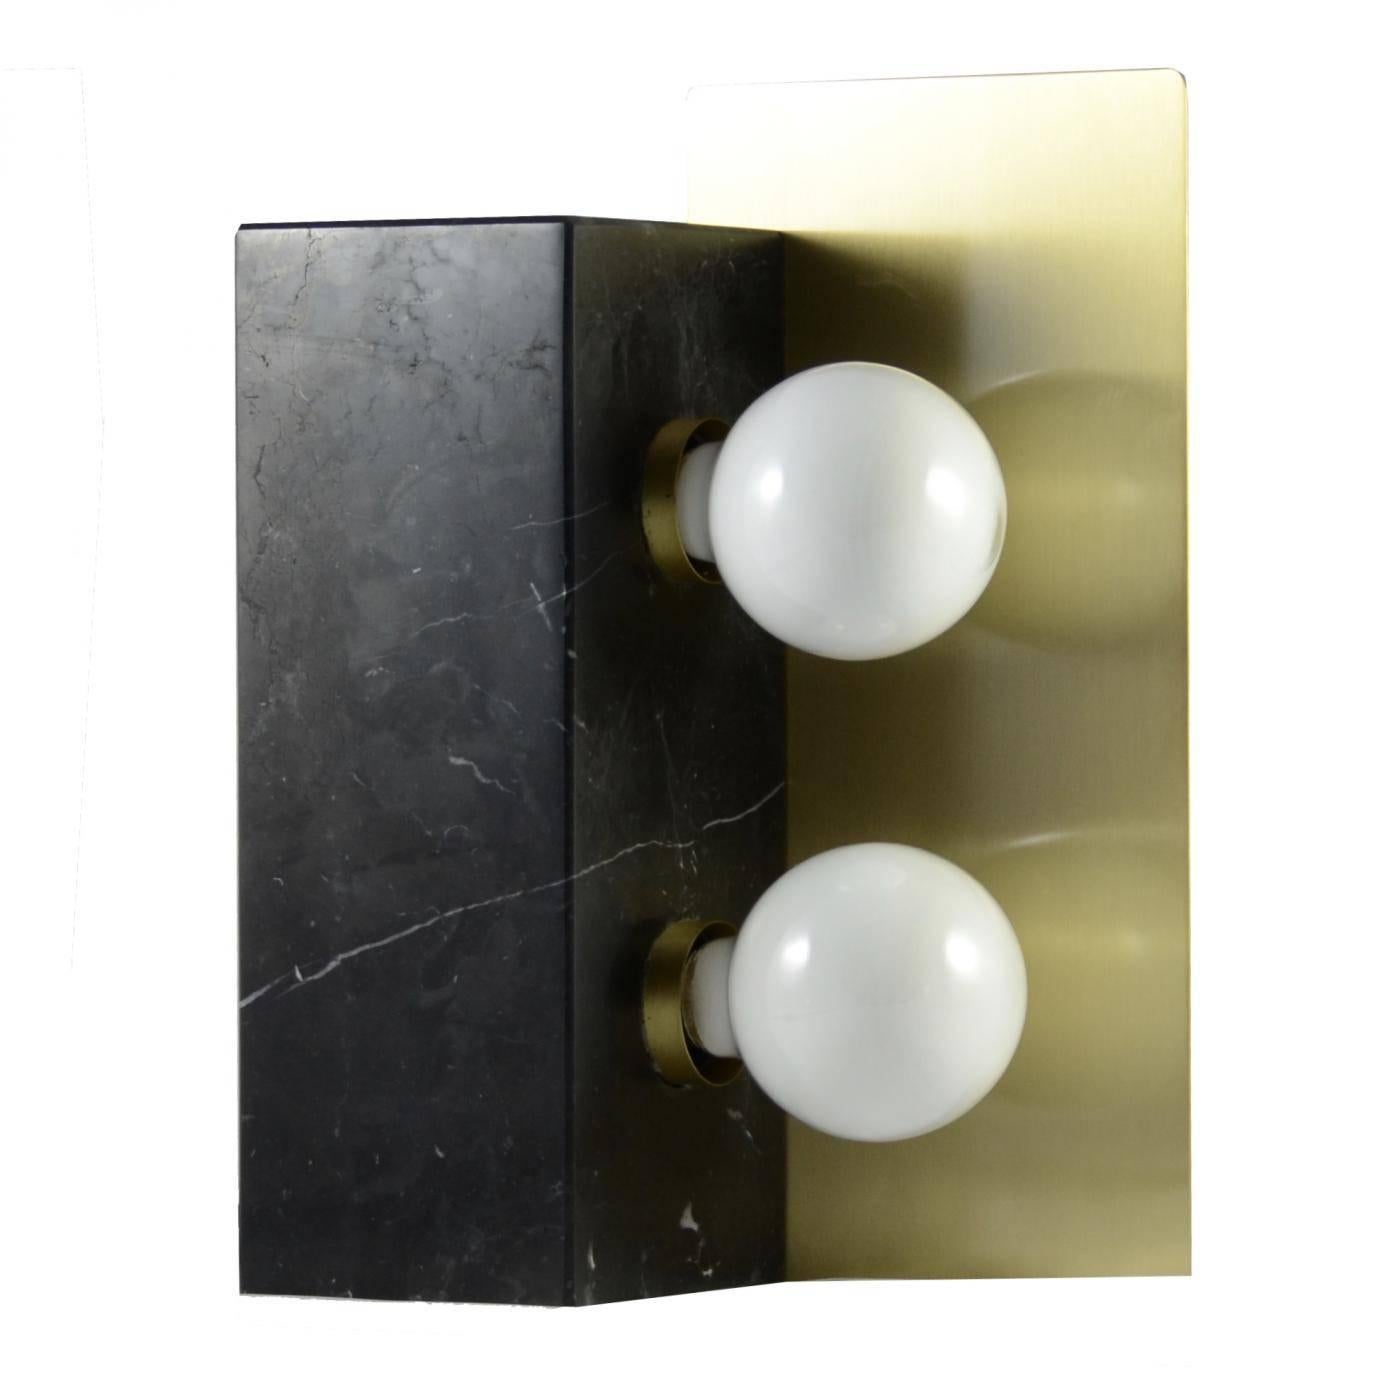 An extraordinary Italian design: the cubus table lamp. This model was designed for people loving the combinasion of modernism and precious materials.

The black Marquinia marble is holding two incandescence lightbulbs. The light is reflected by